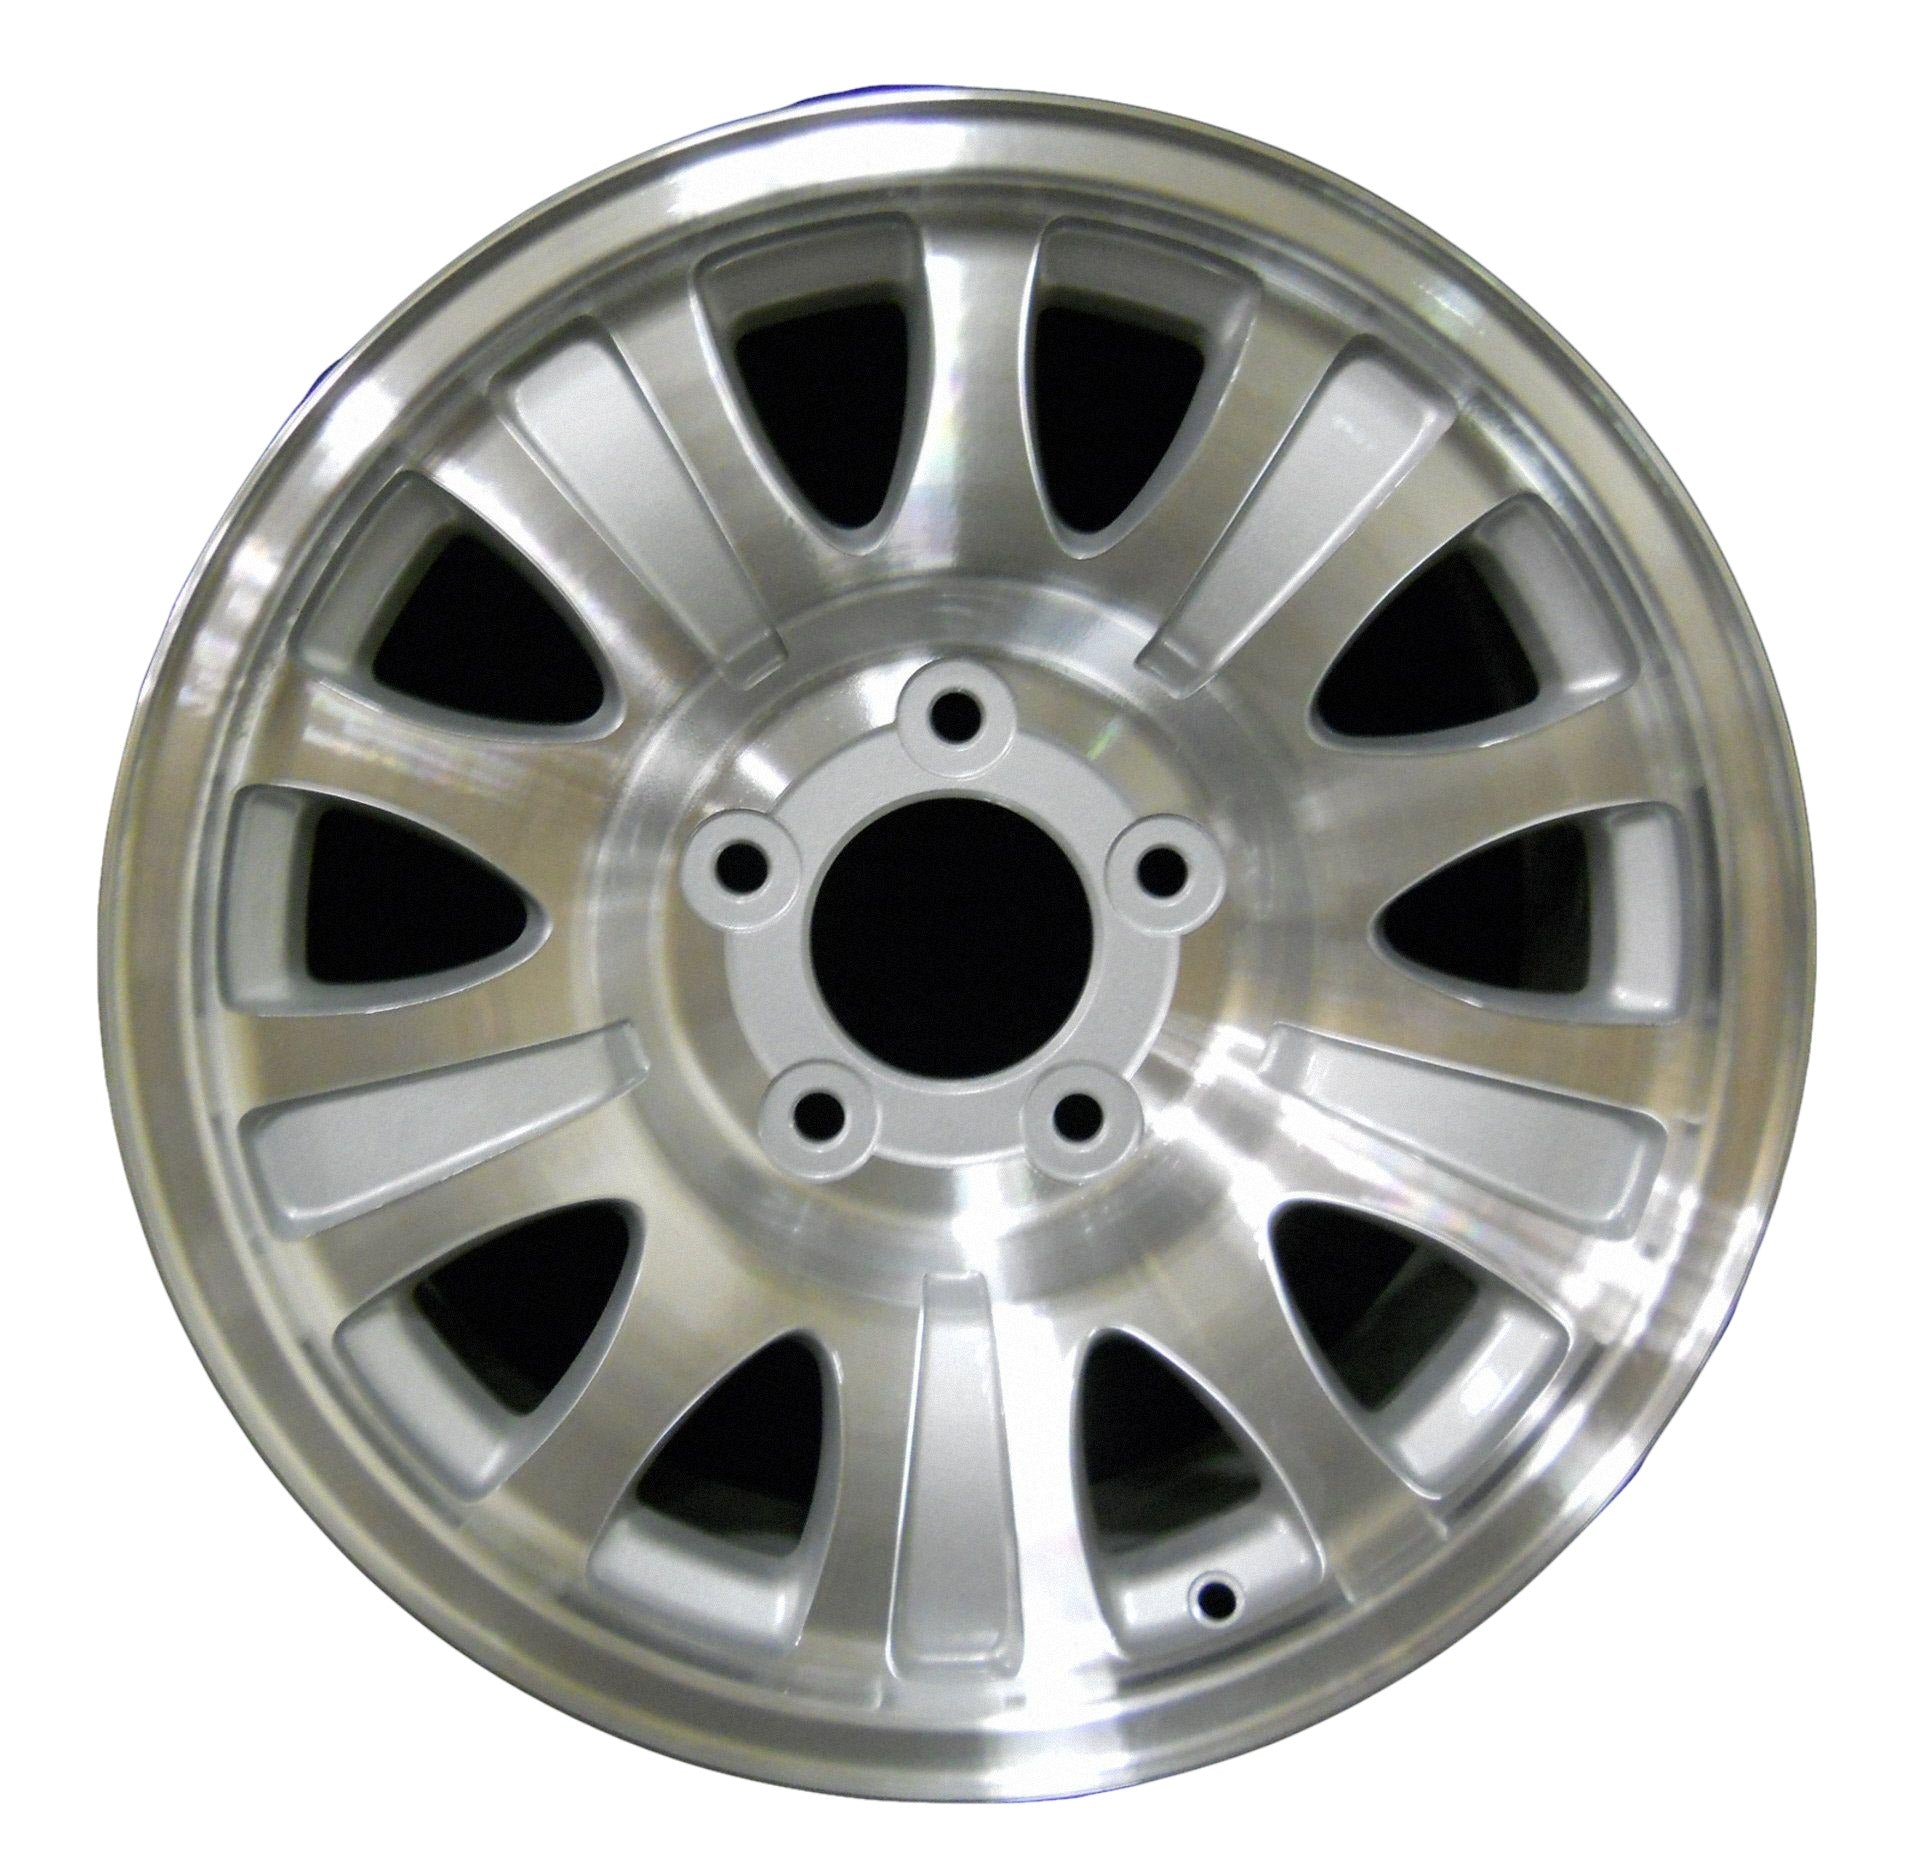 Ford Expedition  2000, 2001 Factory OEM Car Wheel Size 17x7.5 Alloy WAO.3396.PS02.MA